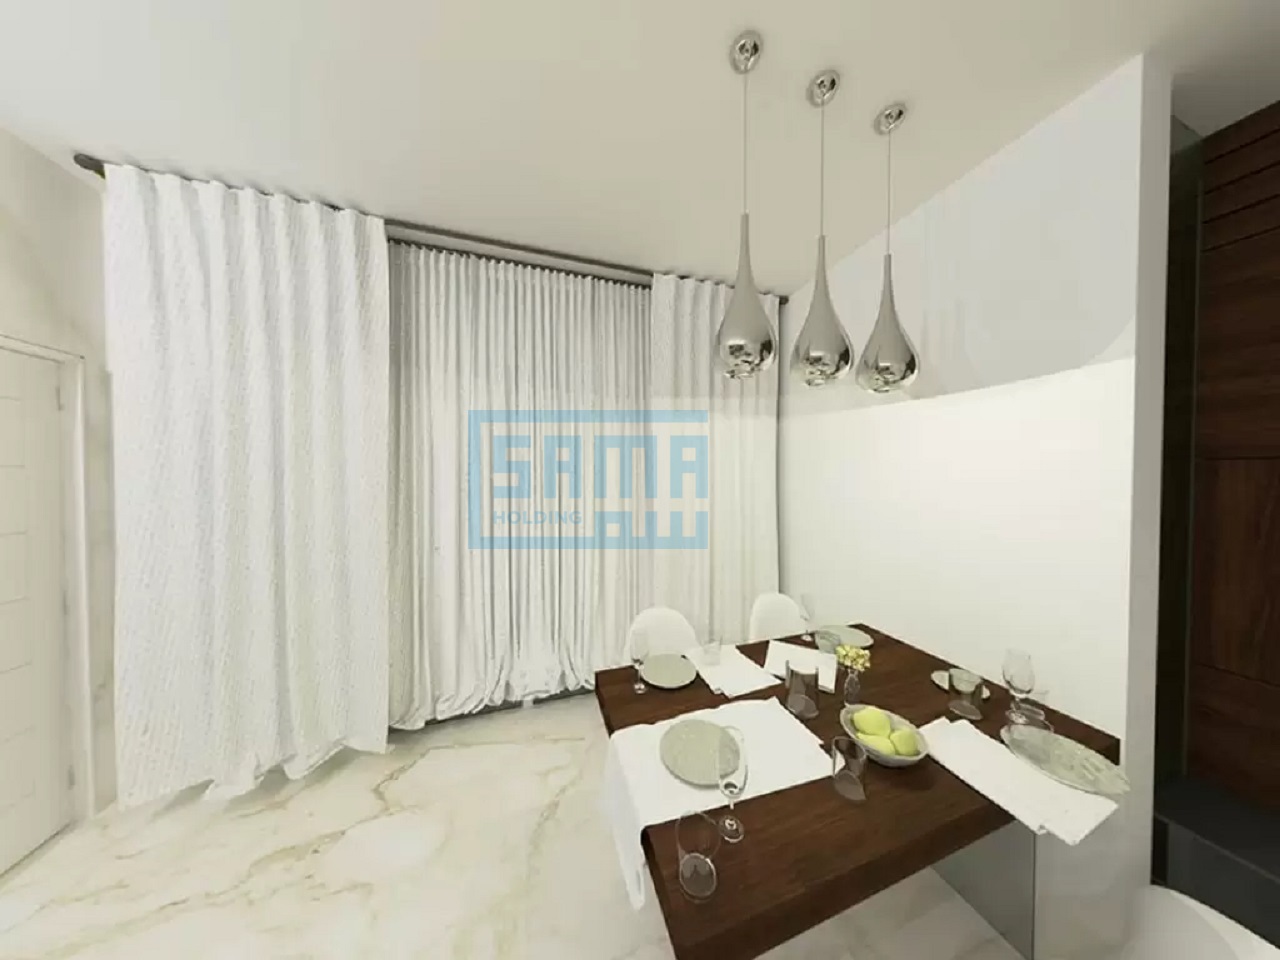 Furnished 2 Bedroom Apartment for Sale in Abu Dhabi in Al Raha Lofts 2, Abu Dhabi - Completed